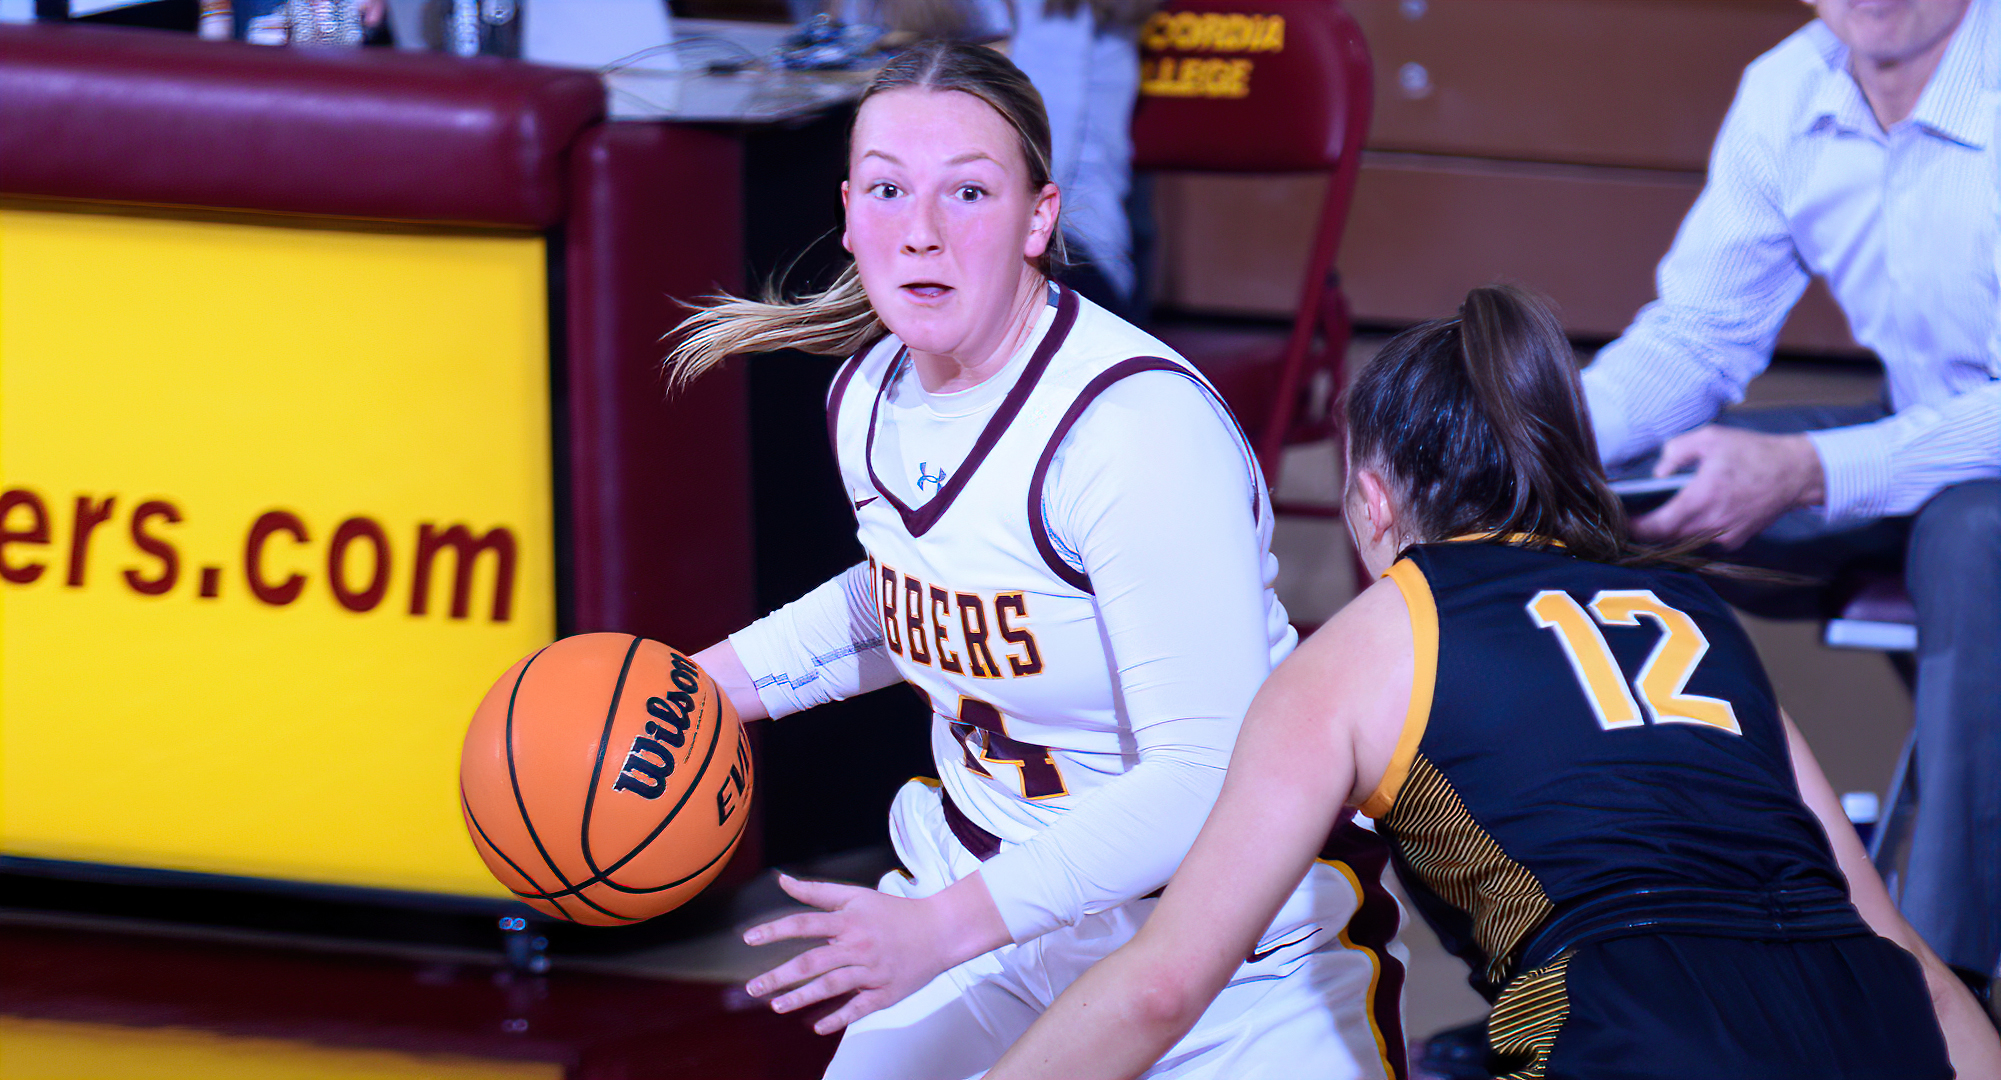 Senior Taviahna Tanin had a career-high point total in the Cobbers' game at St. Scholastica. She went 3-for-4 from 3-point range and had nine points.